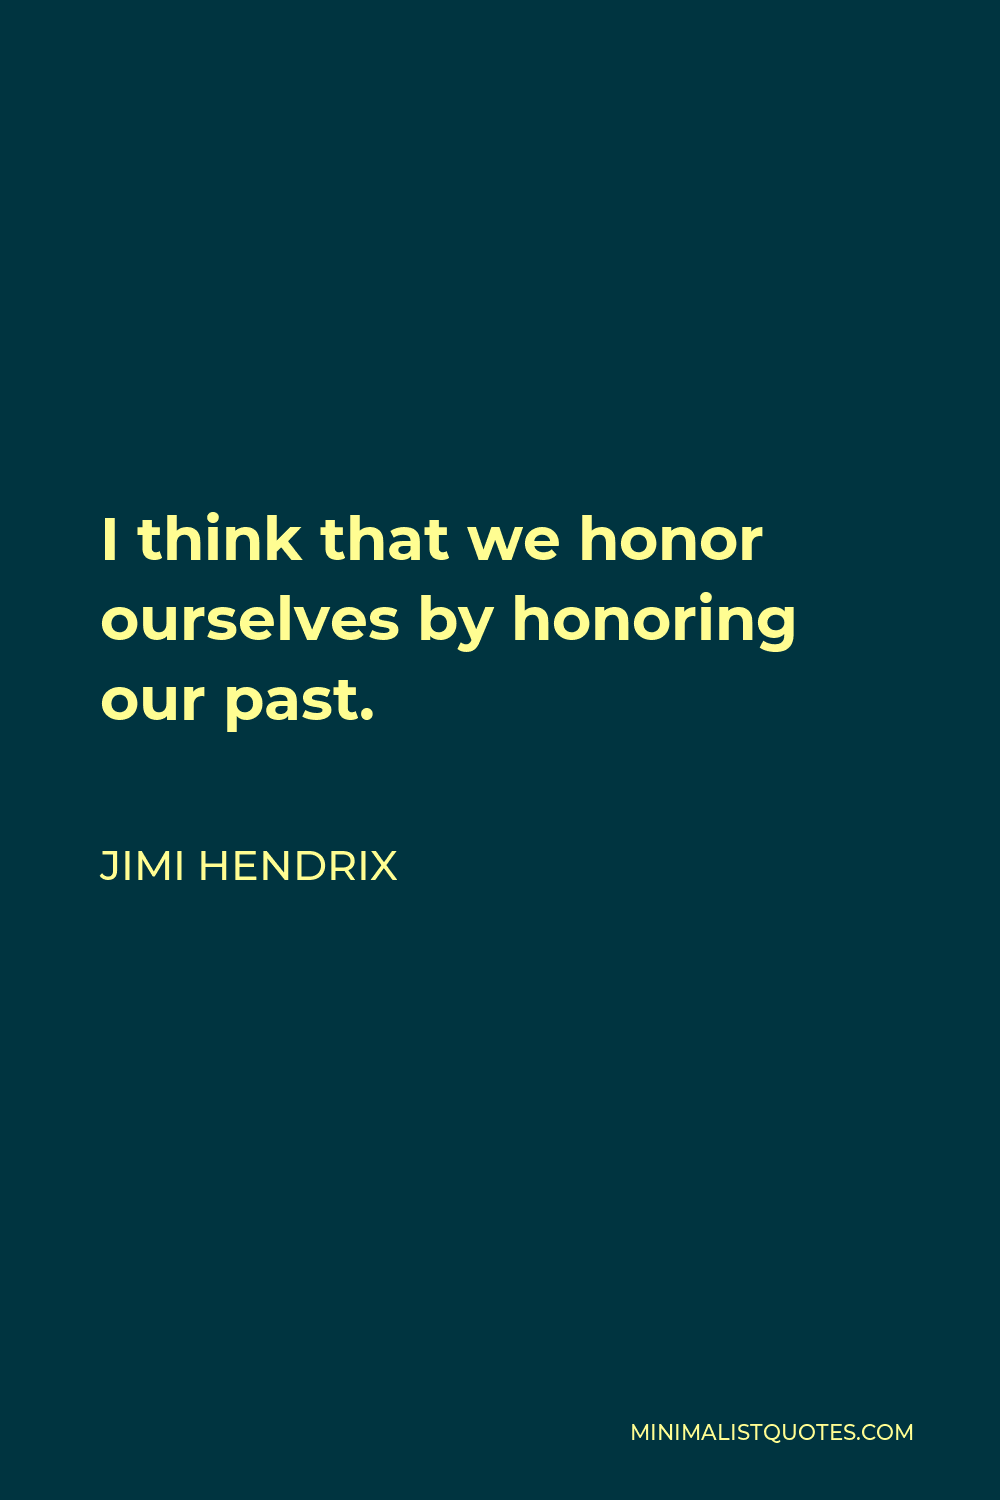 Jimi Hendrix Quote - I think that we honor ourselves by honoring our past.